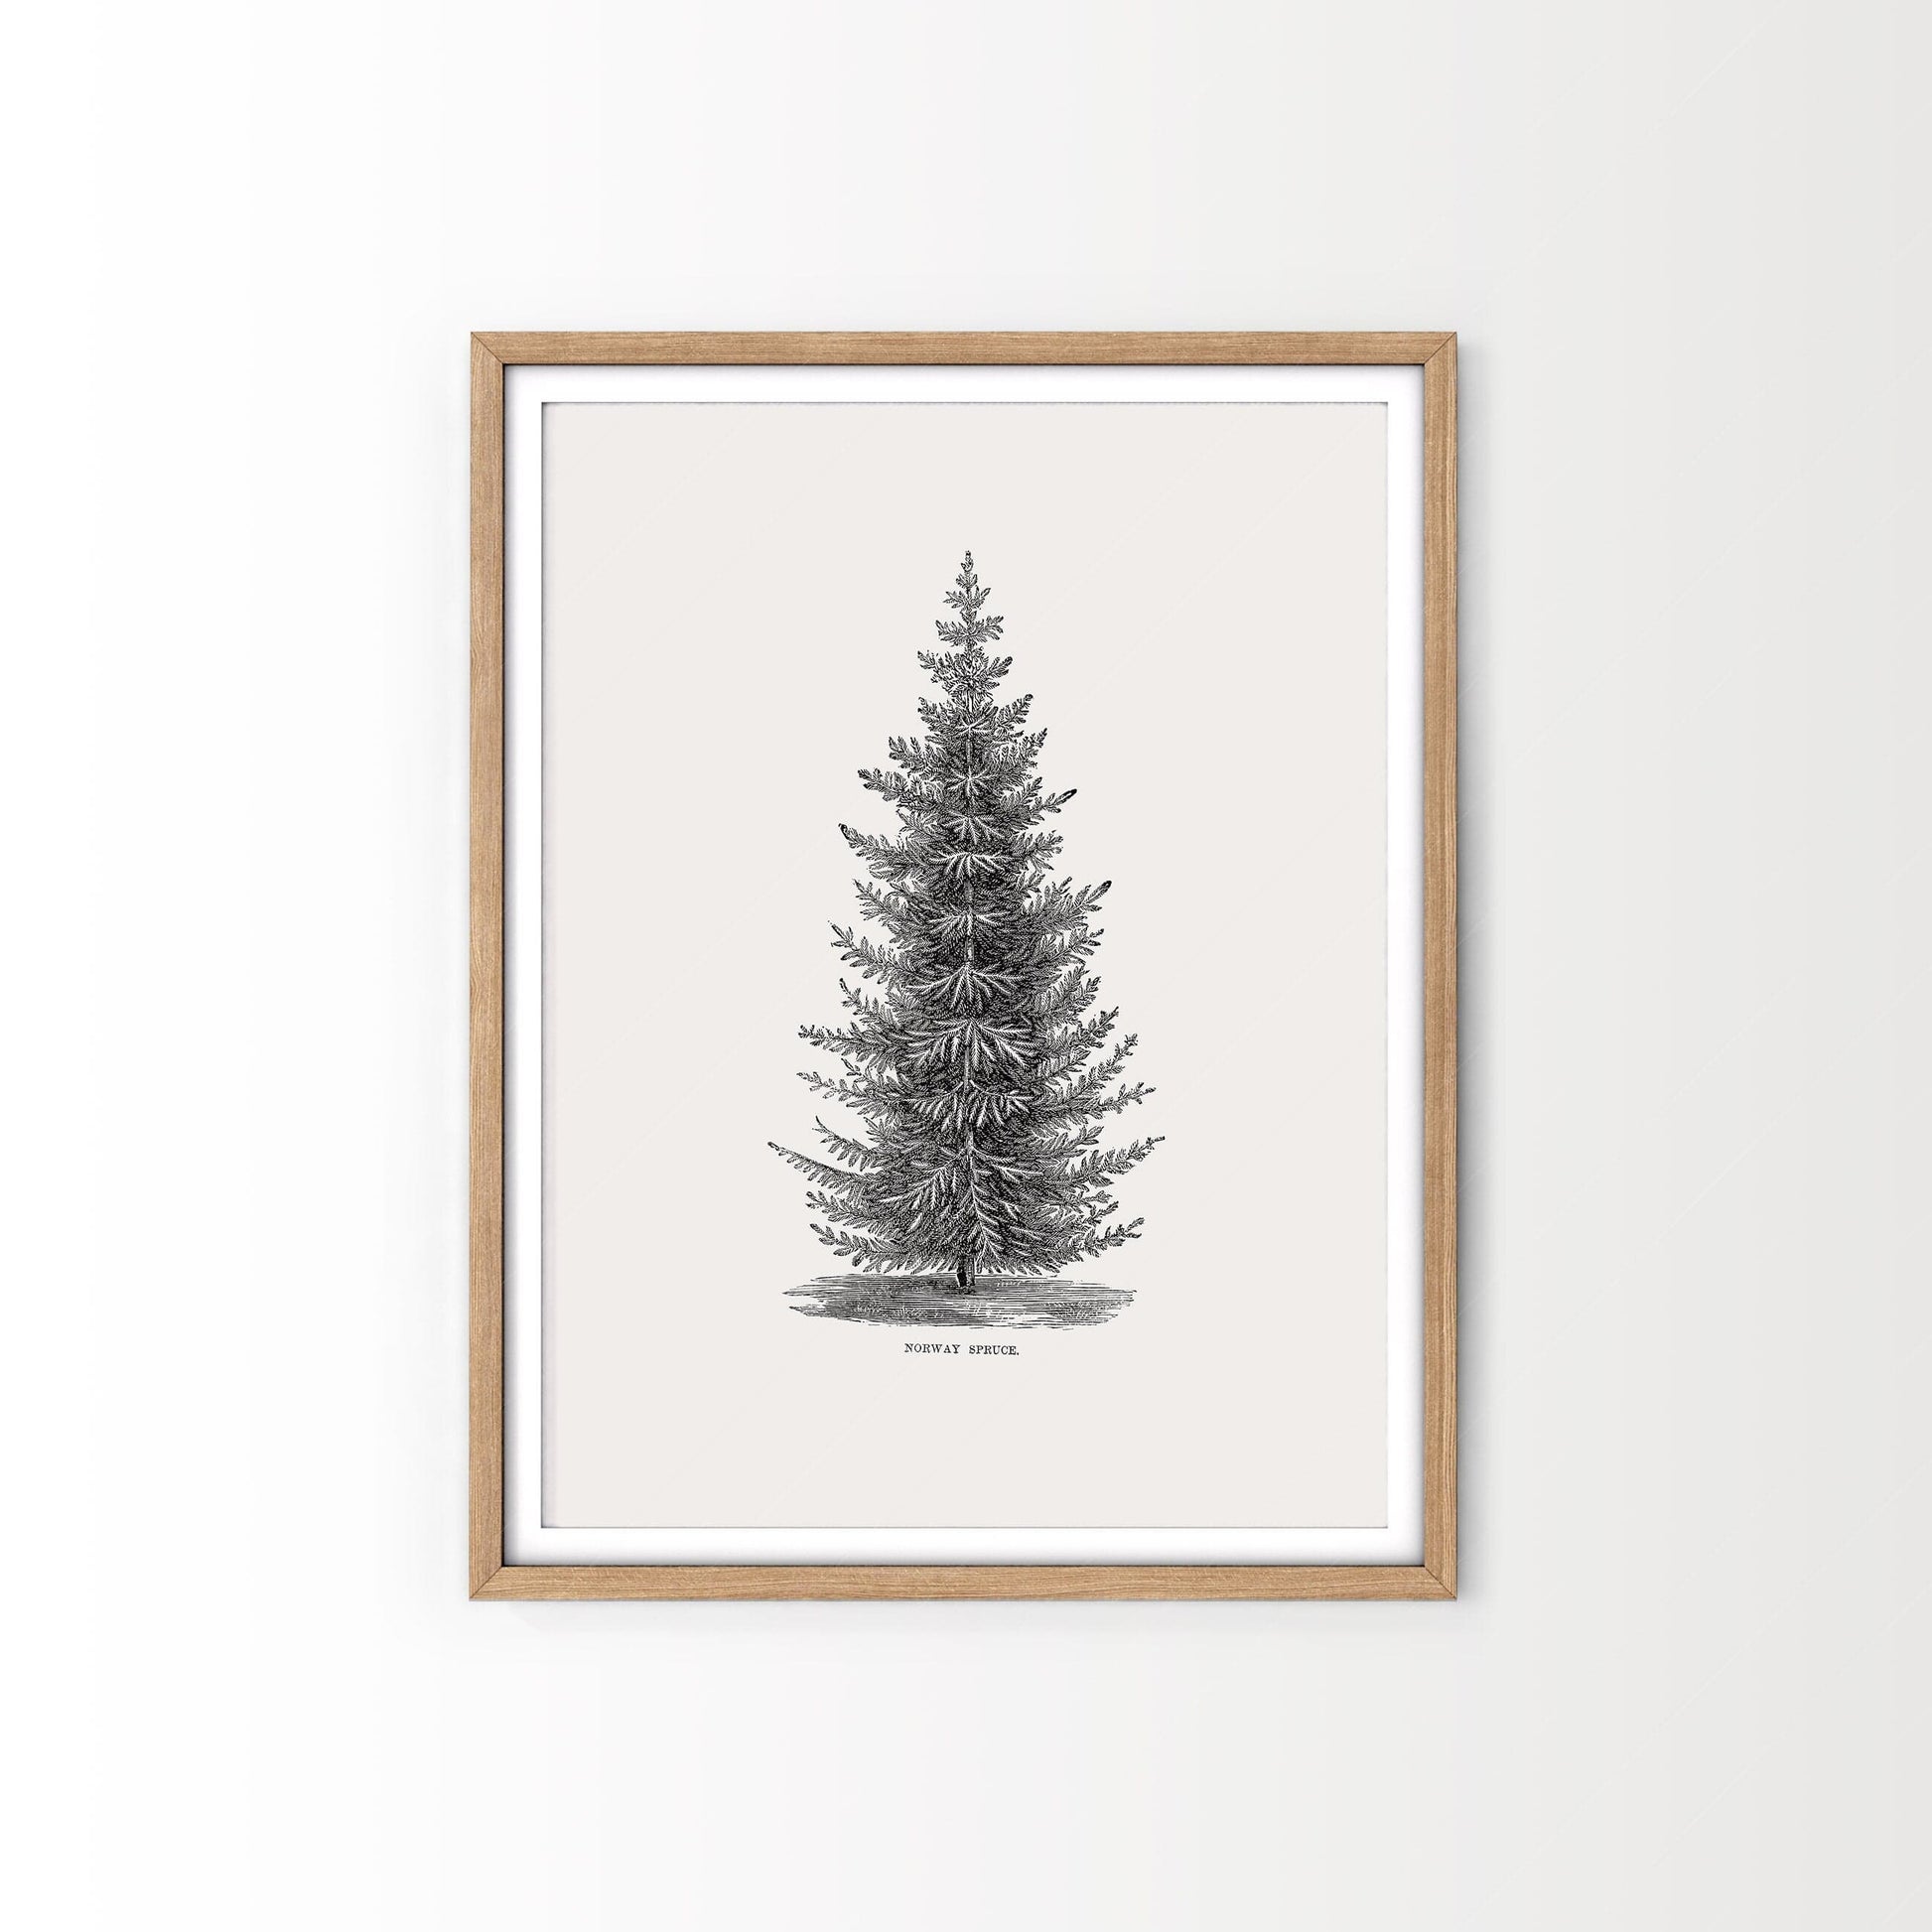 Home Poster Decor Single Norway spruce tree, Botanical Print, Forest Poster, Winter Tree Photo, Pine Tree Print, Vintage Nature Art, Vintage Gift, Nordic Forest